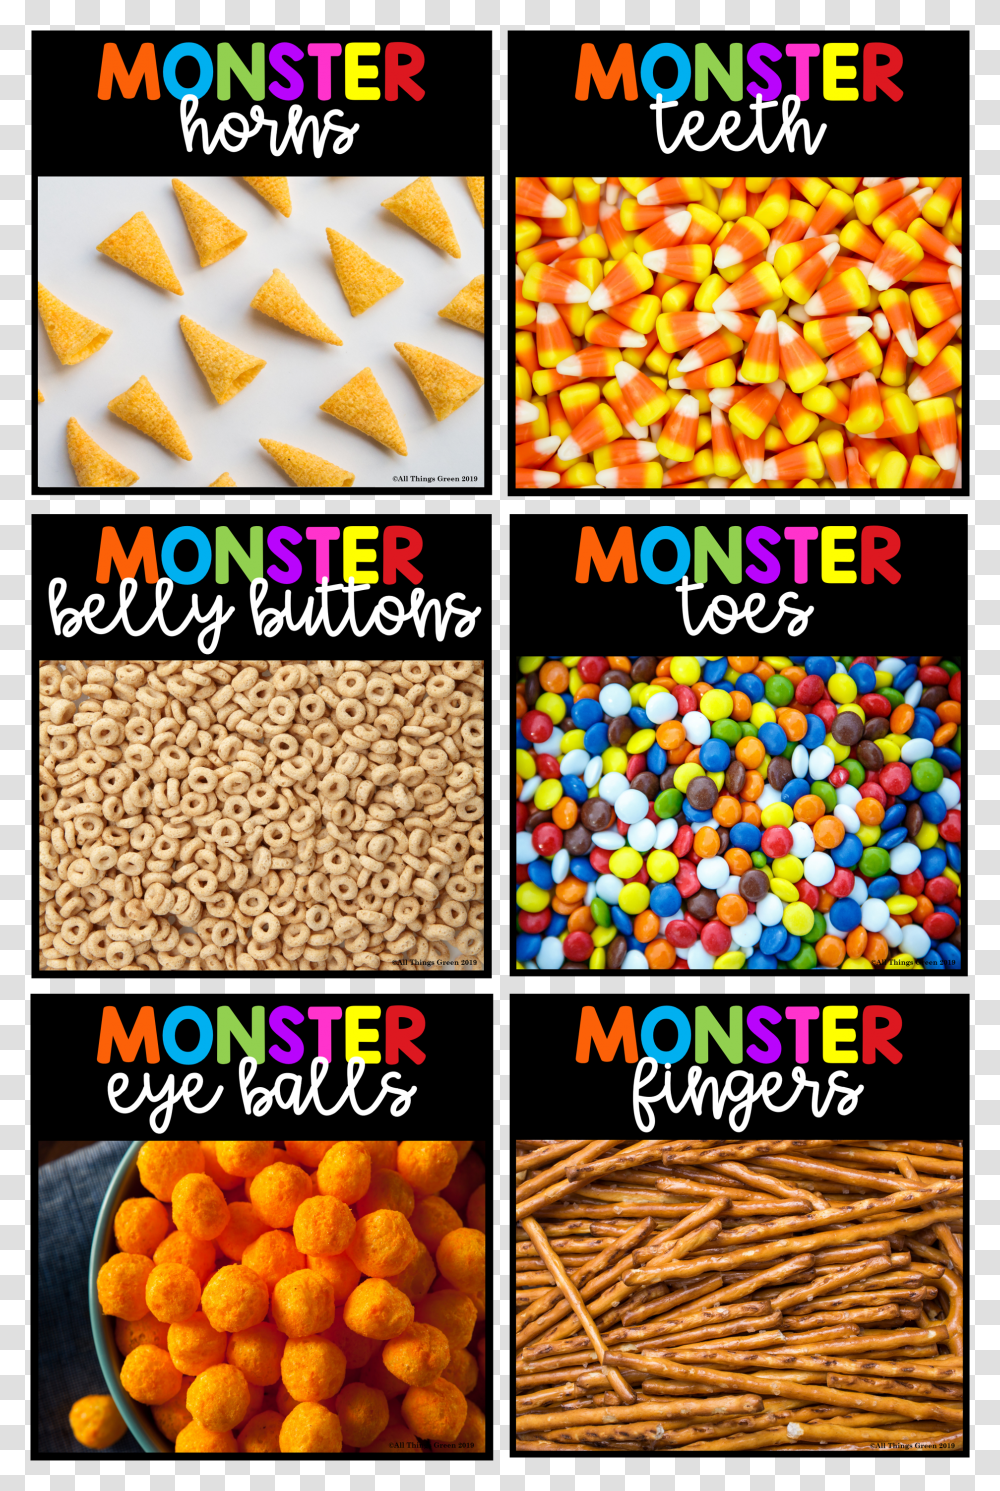 Snack Idea For School Halloween Party Monster Munch Superfood Transparent Png